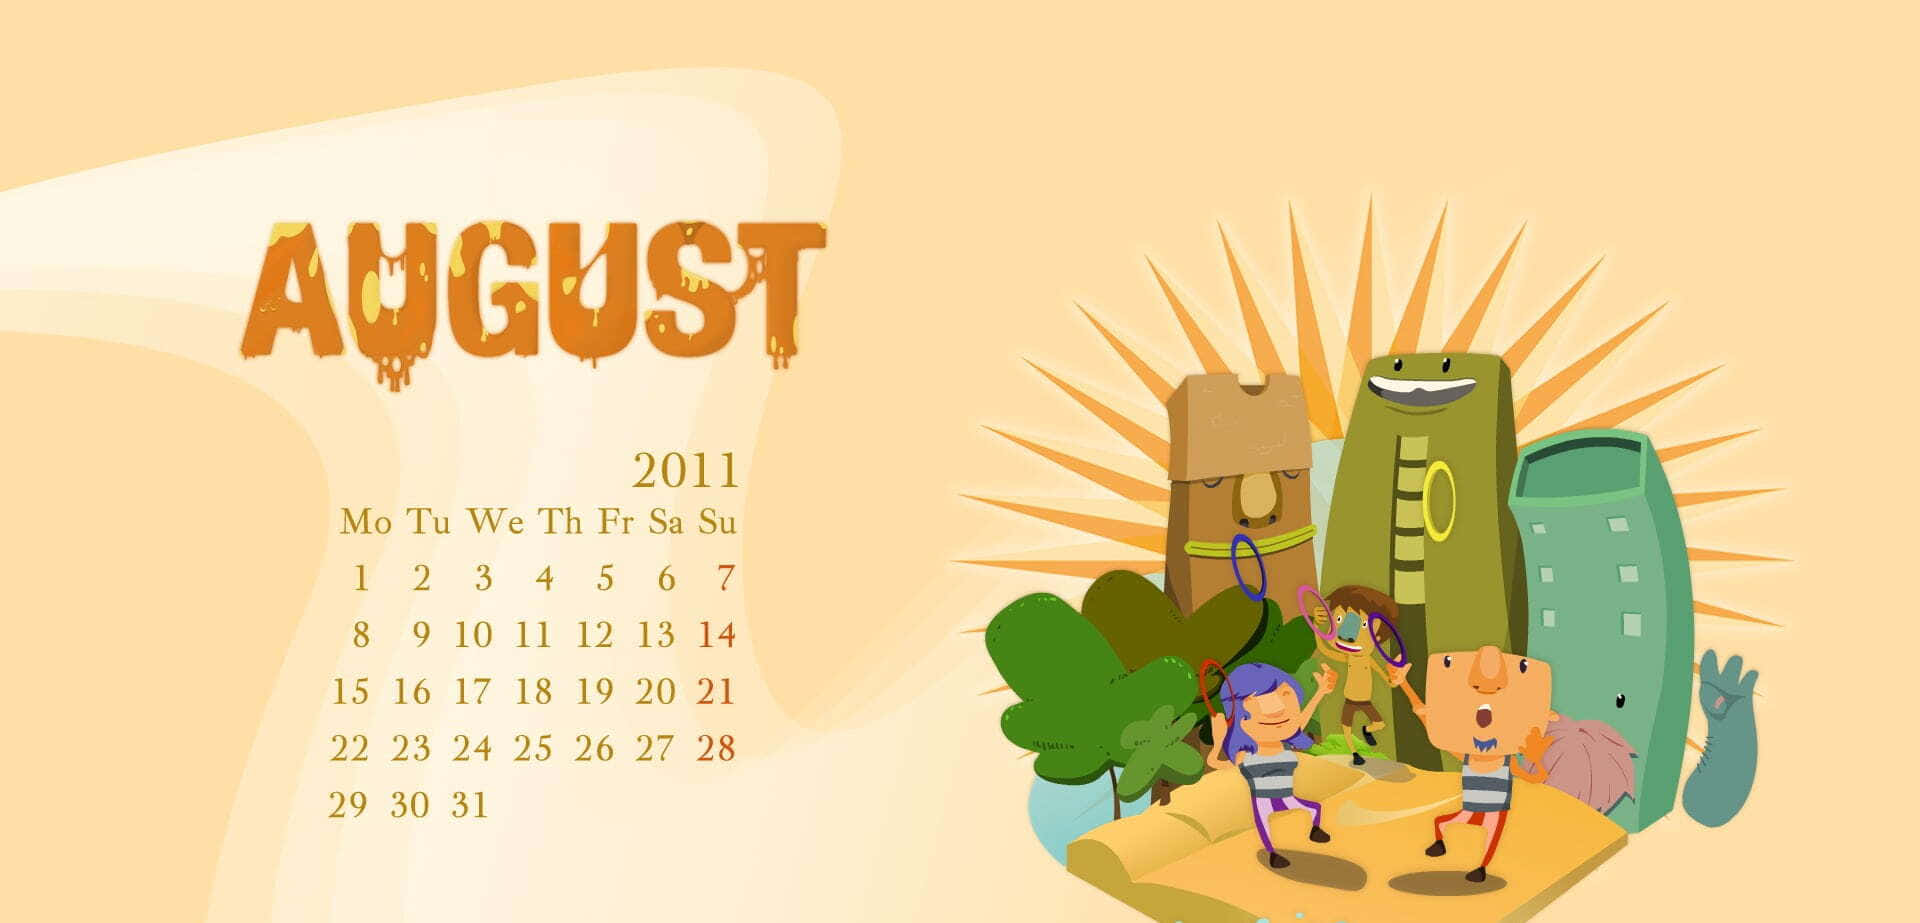 Welcome to August - the Last Real Summer Month